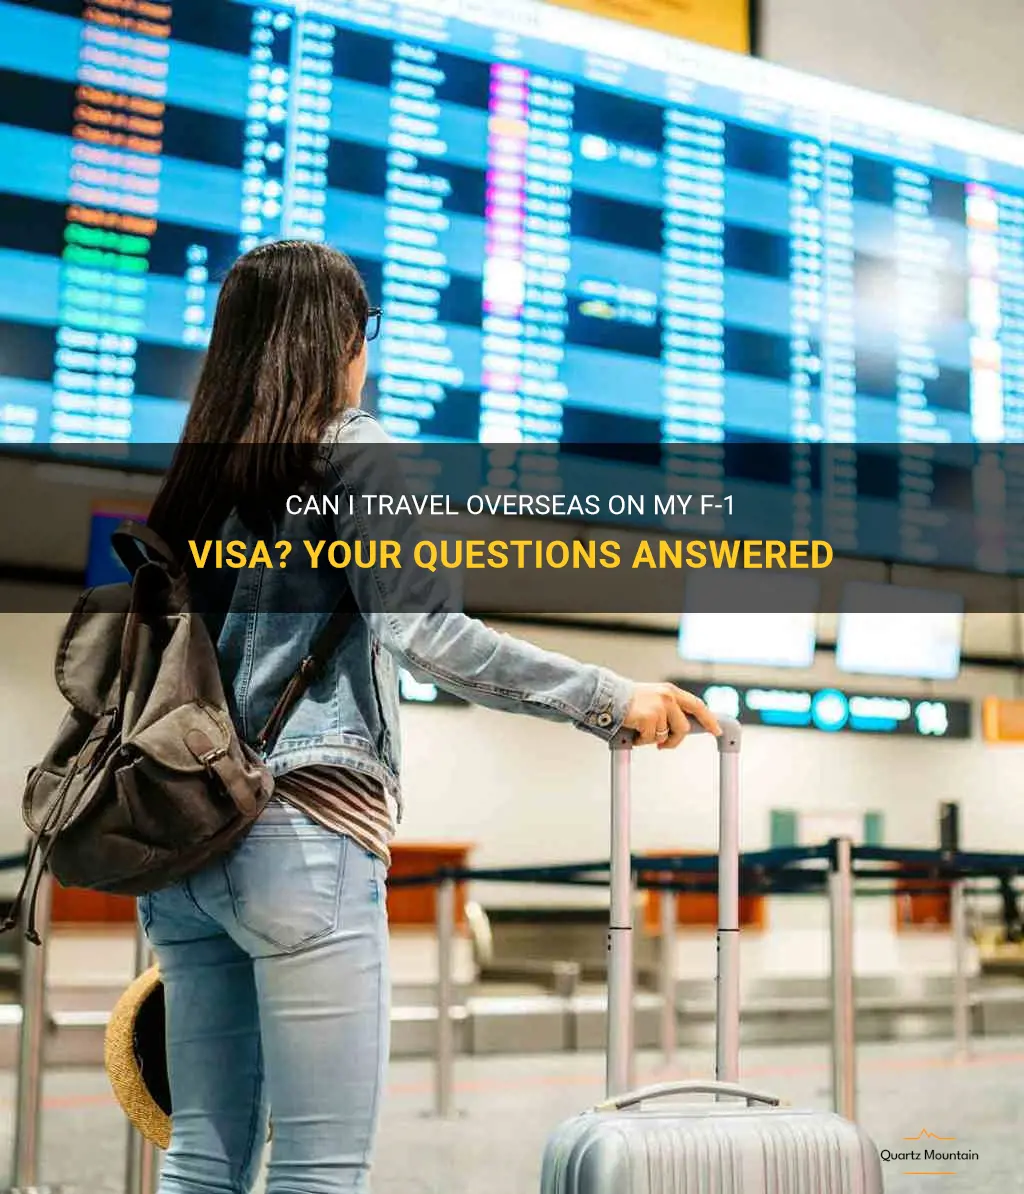 can i travel overseas on my f-1 visa